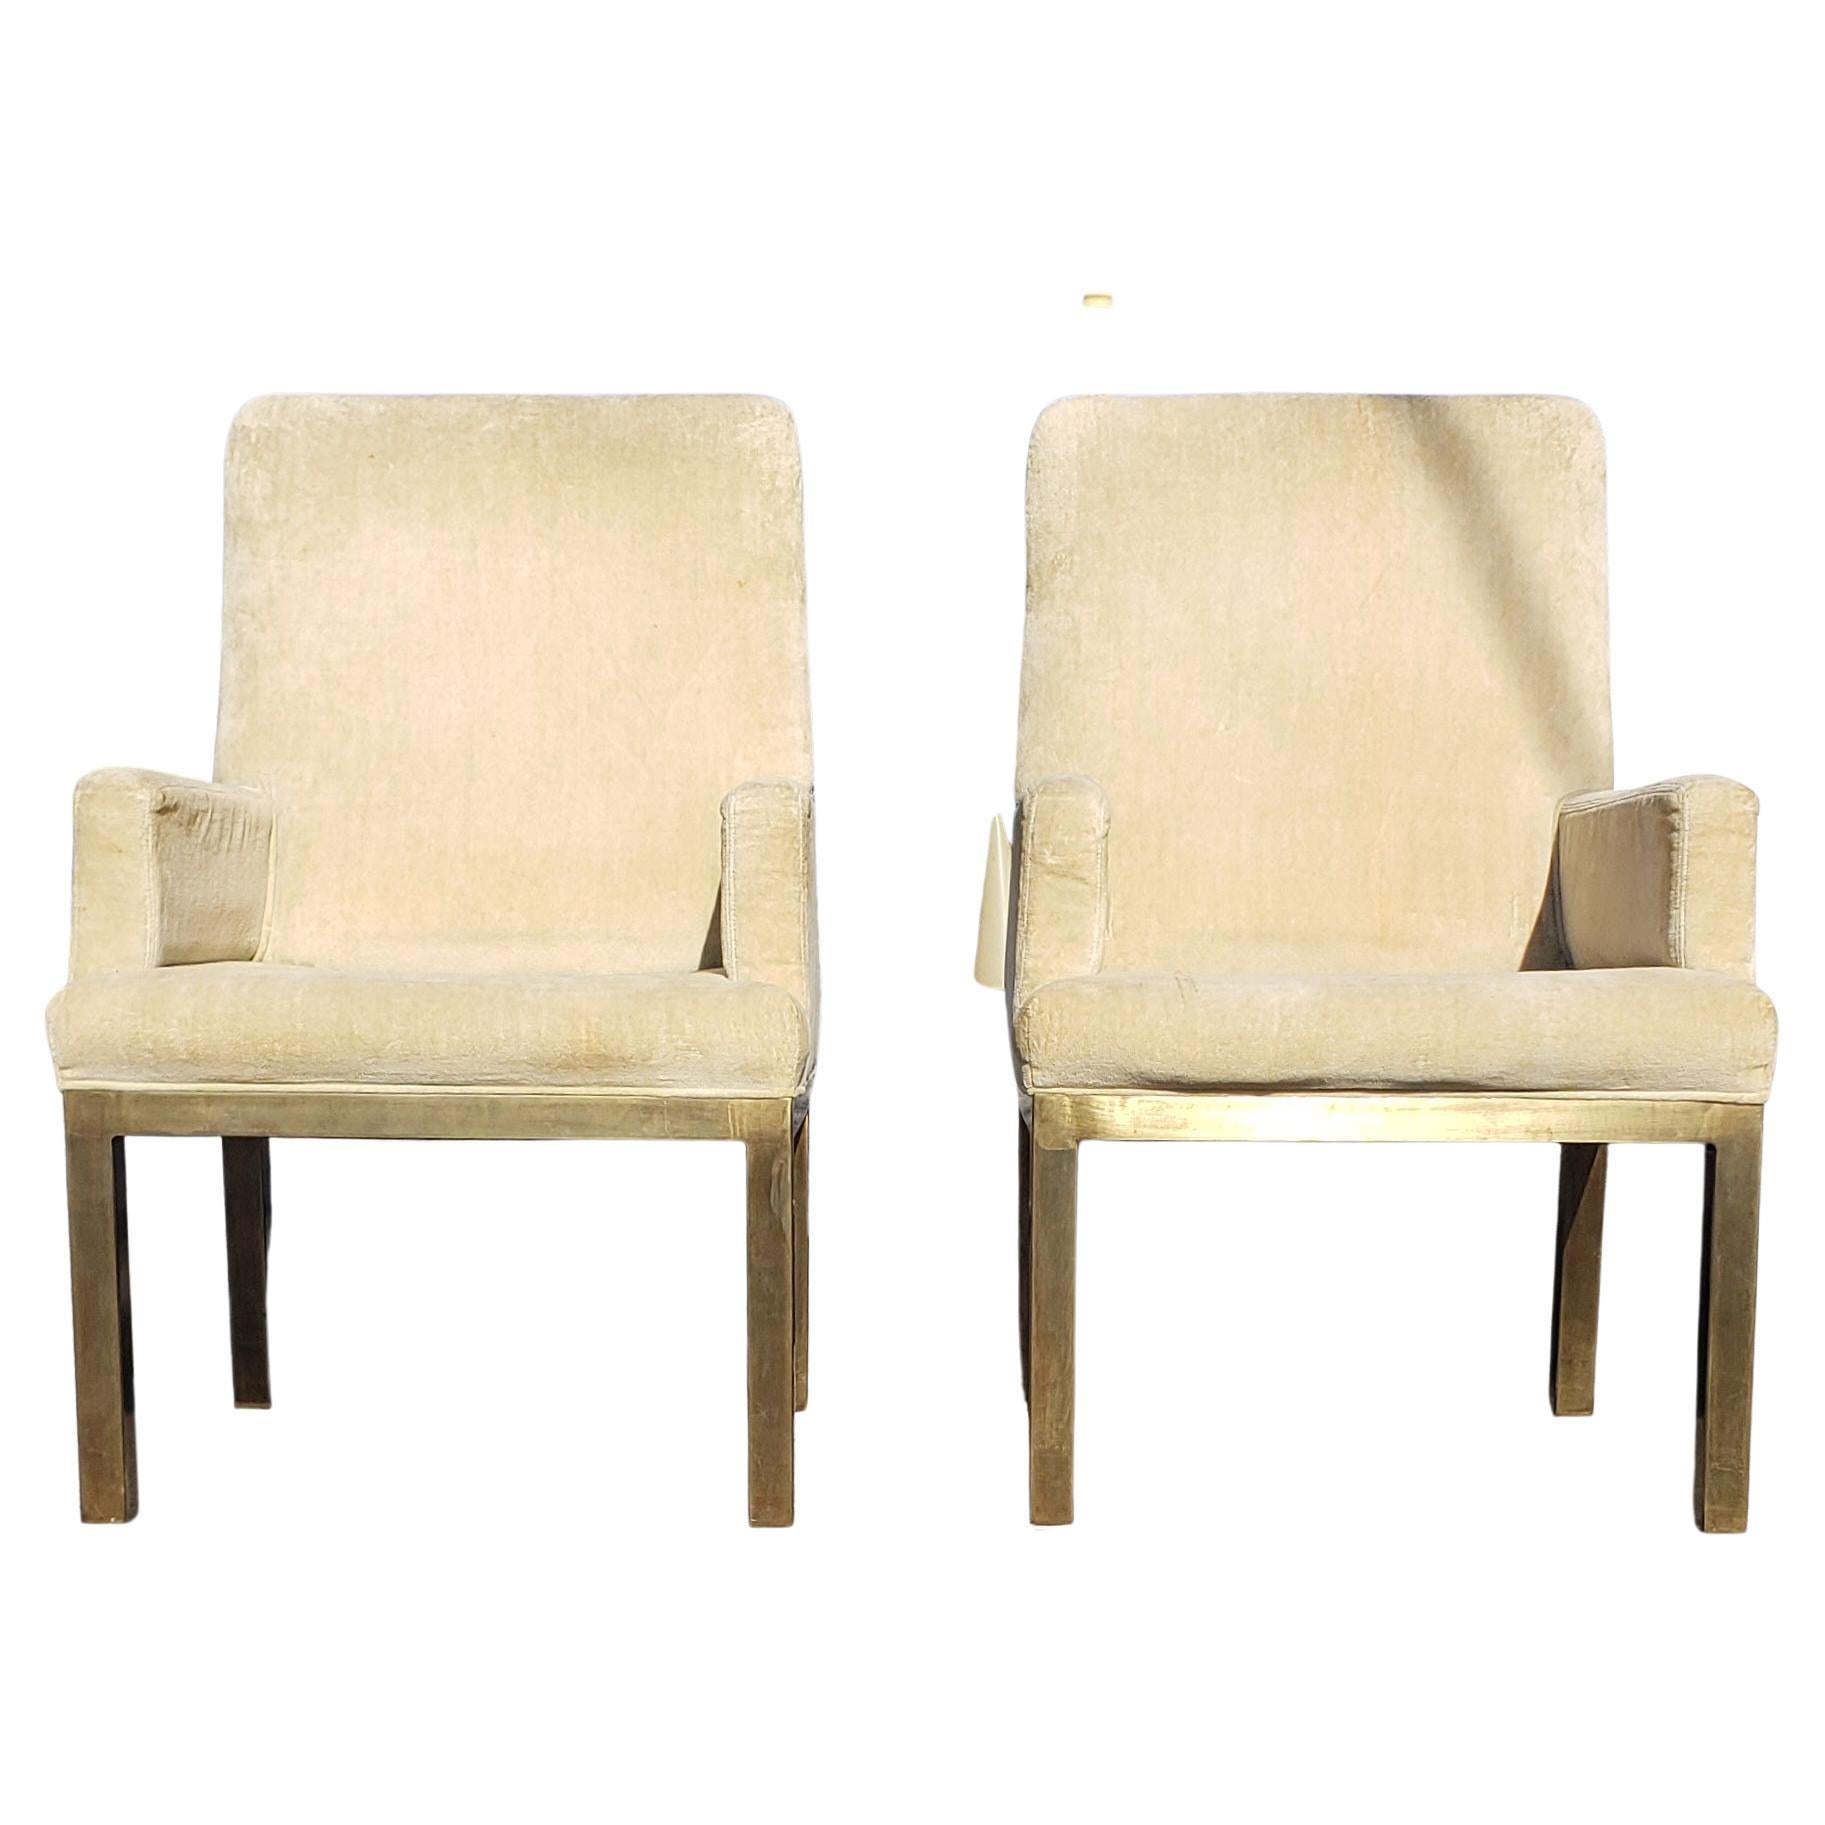 Beautiful pair of armchairs by Mastercraft. Manufactured manufactured in Spain in the 1970s. This pair does need to be rebuilt and reaupulstered. Is excellent for the dining table, the desk, the game table or the living room. These chairs can be